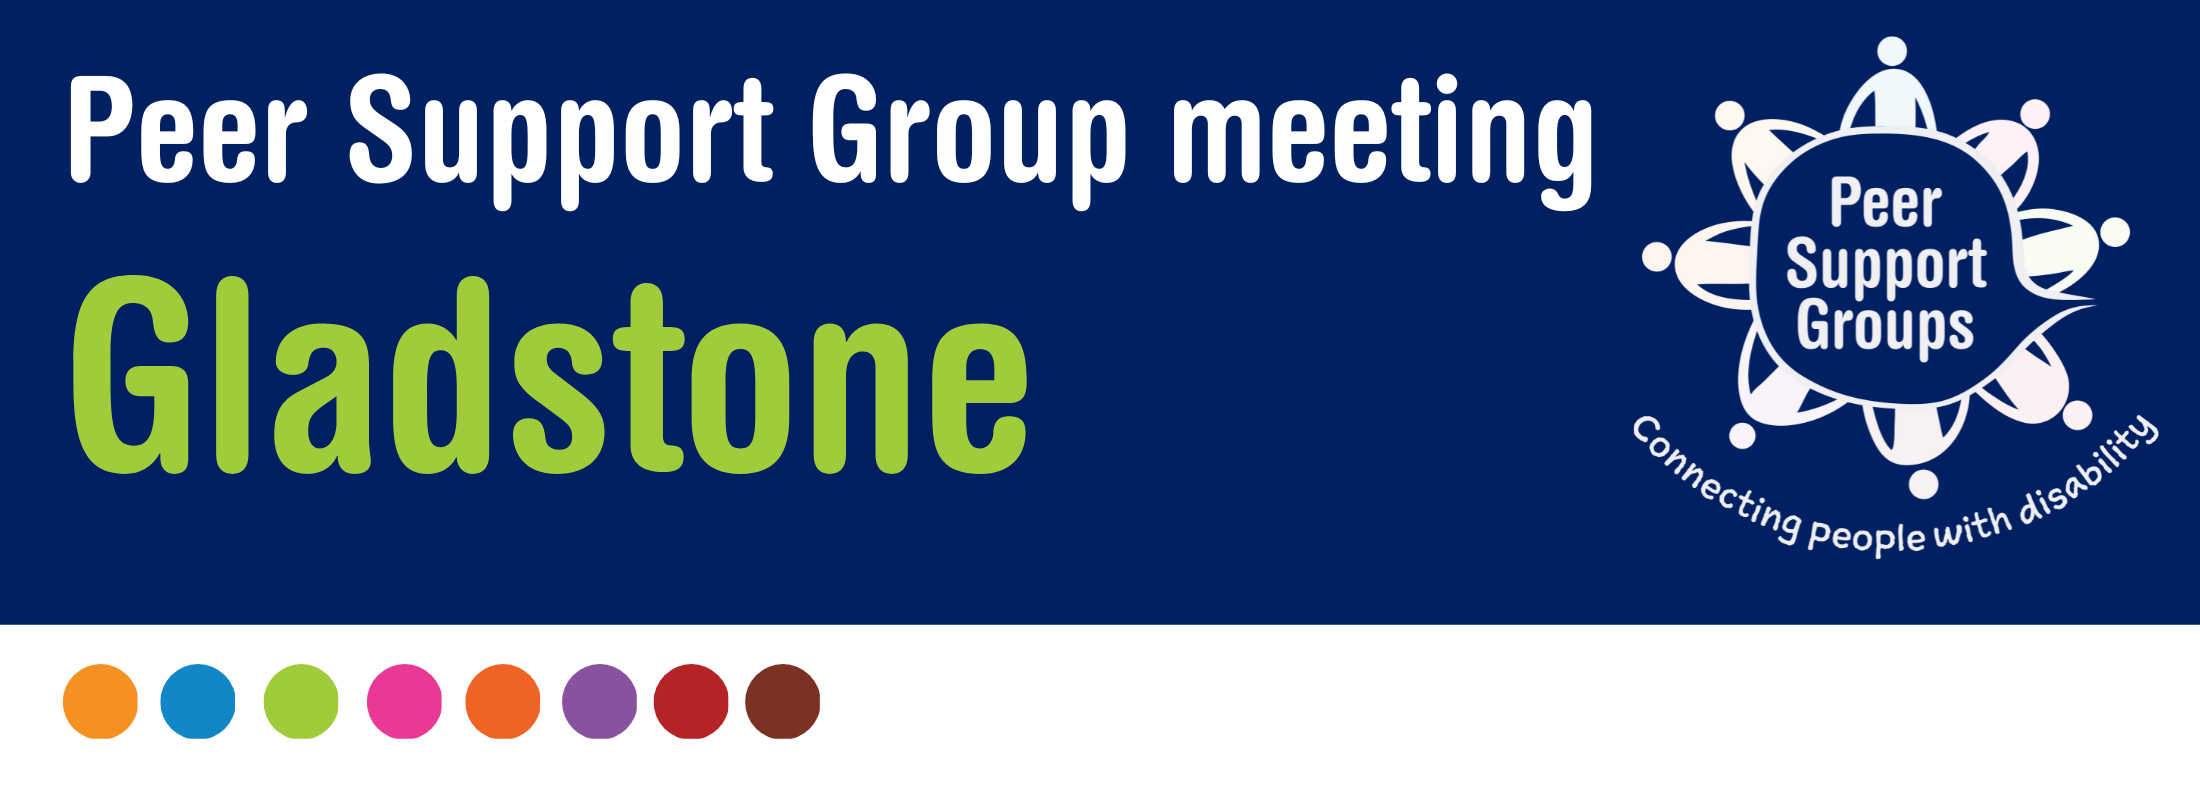 Dark blue back ground with a text saying Peer Support Group meeting - Gladstone